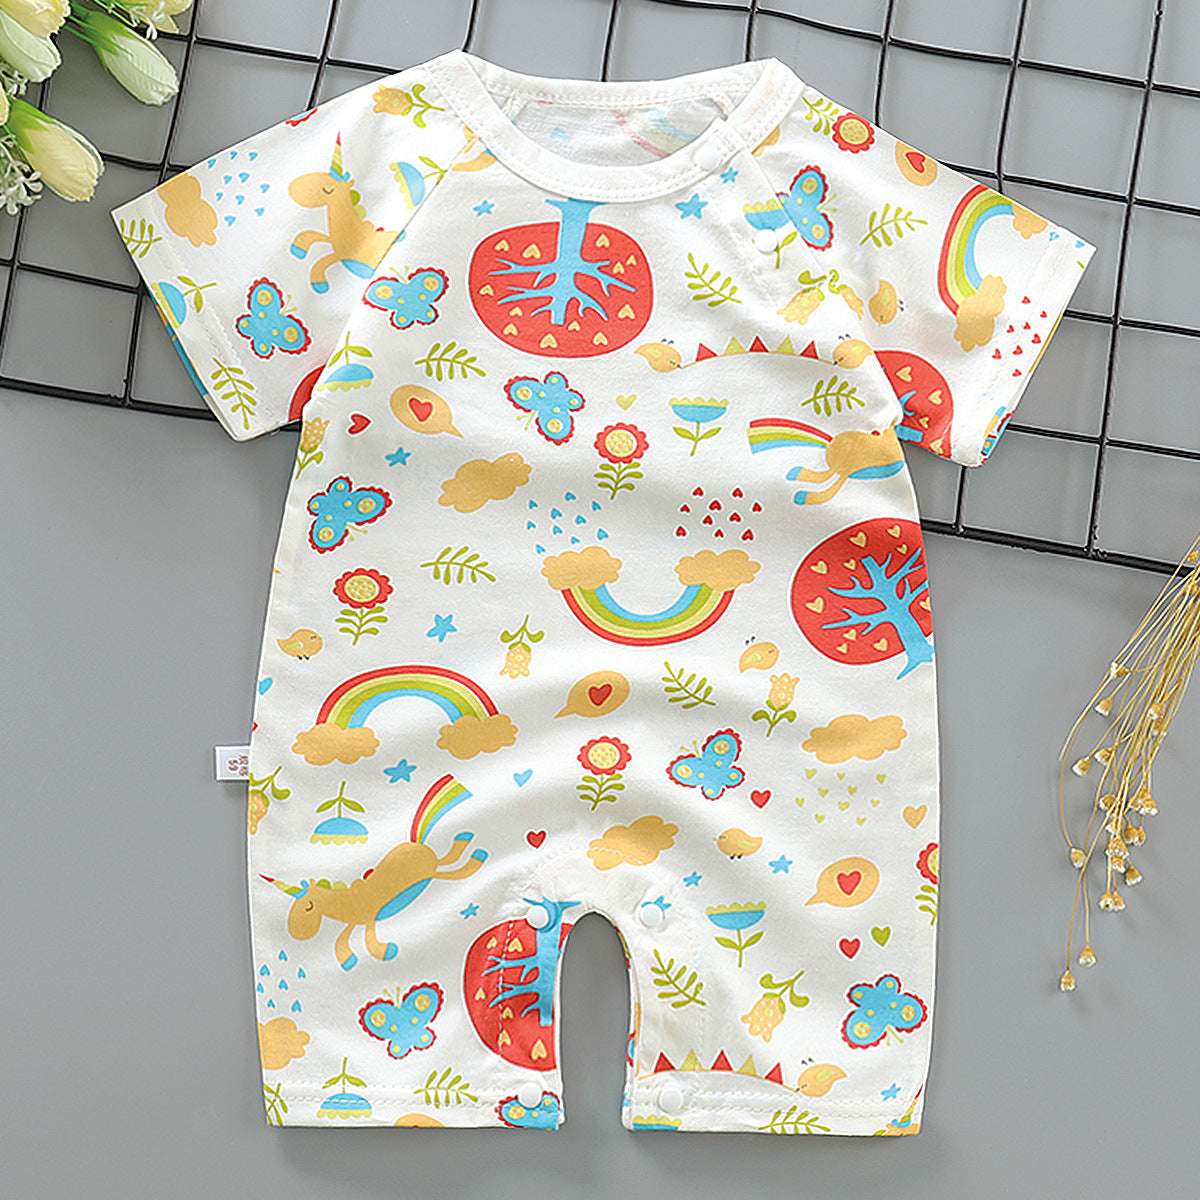 Thin Cotton Short-sleeved Short-climbing Jumpsuit For Boys And 1 Baby Girl (by quicklify)